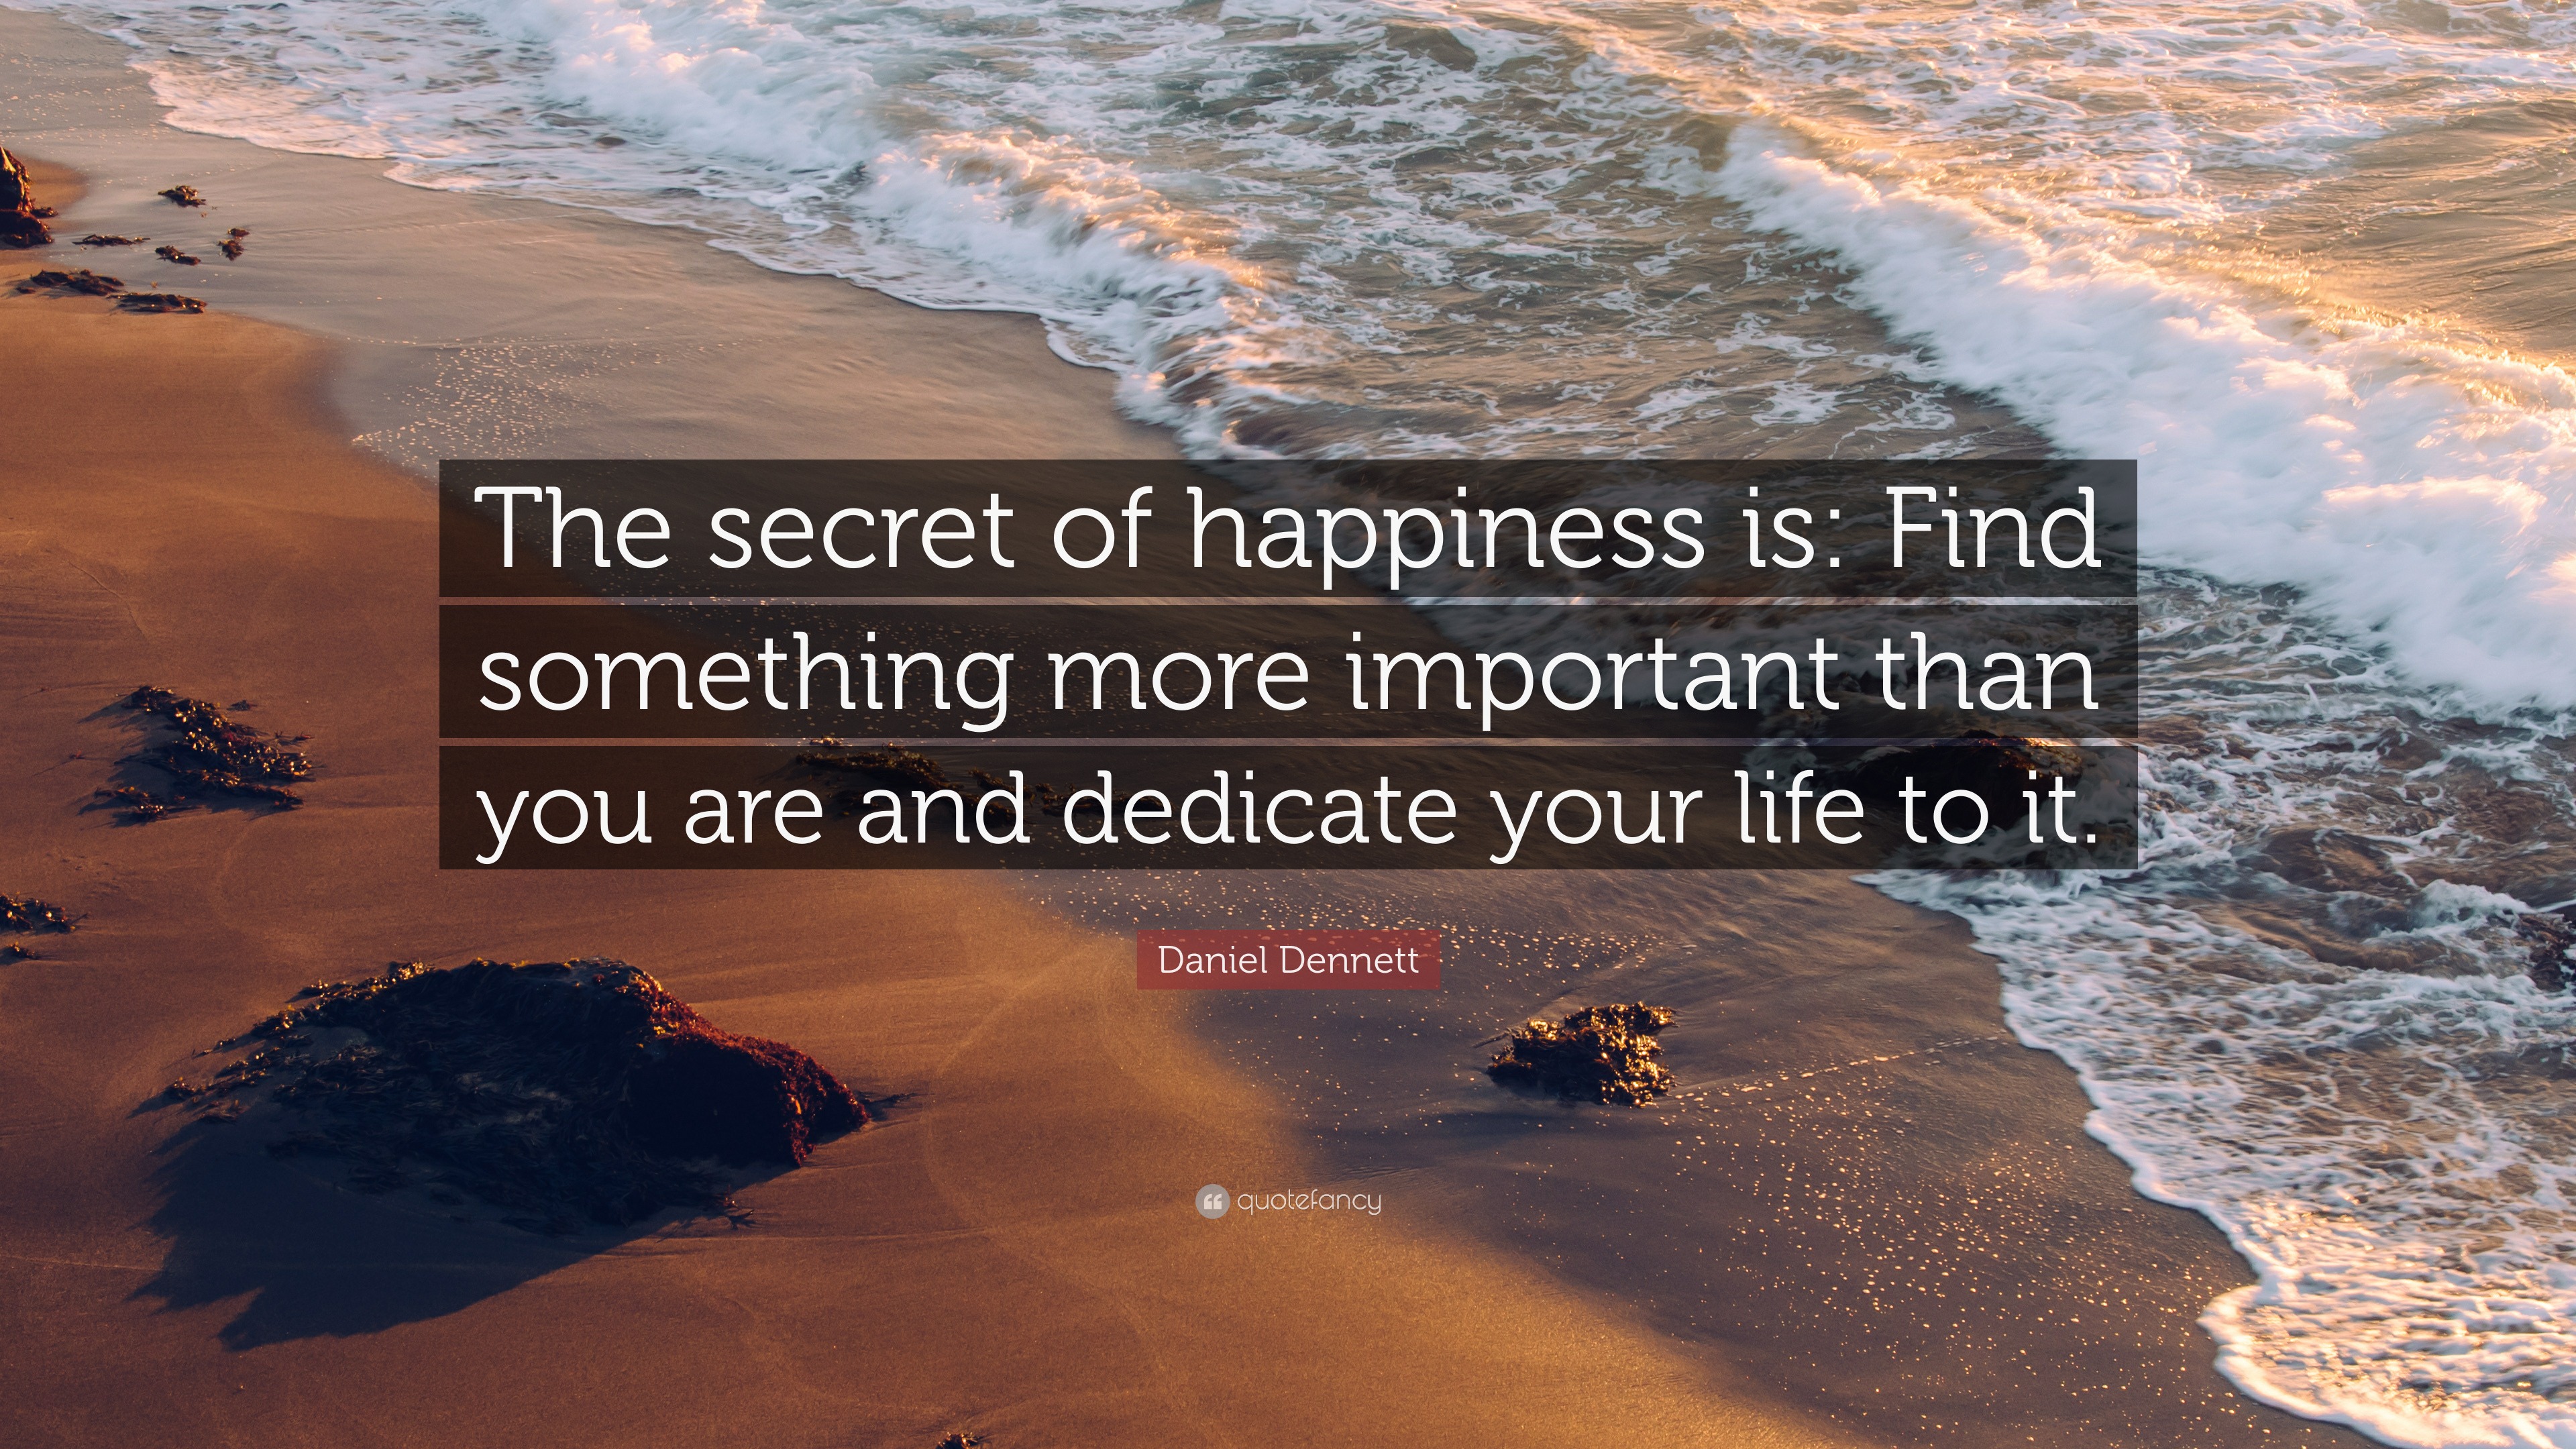 Daniel Dennett Quote: “The secret of happiness is: Find something more ...